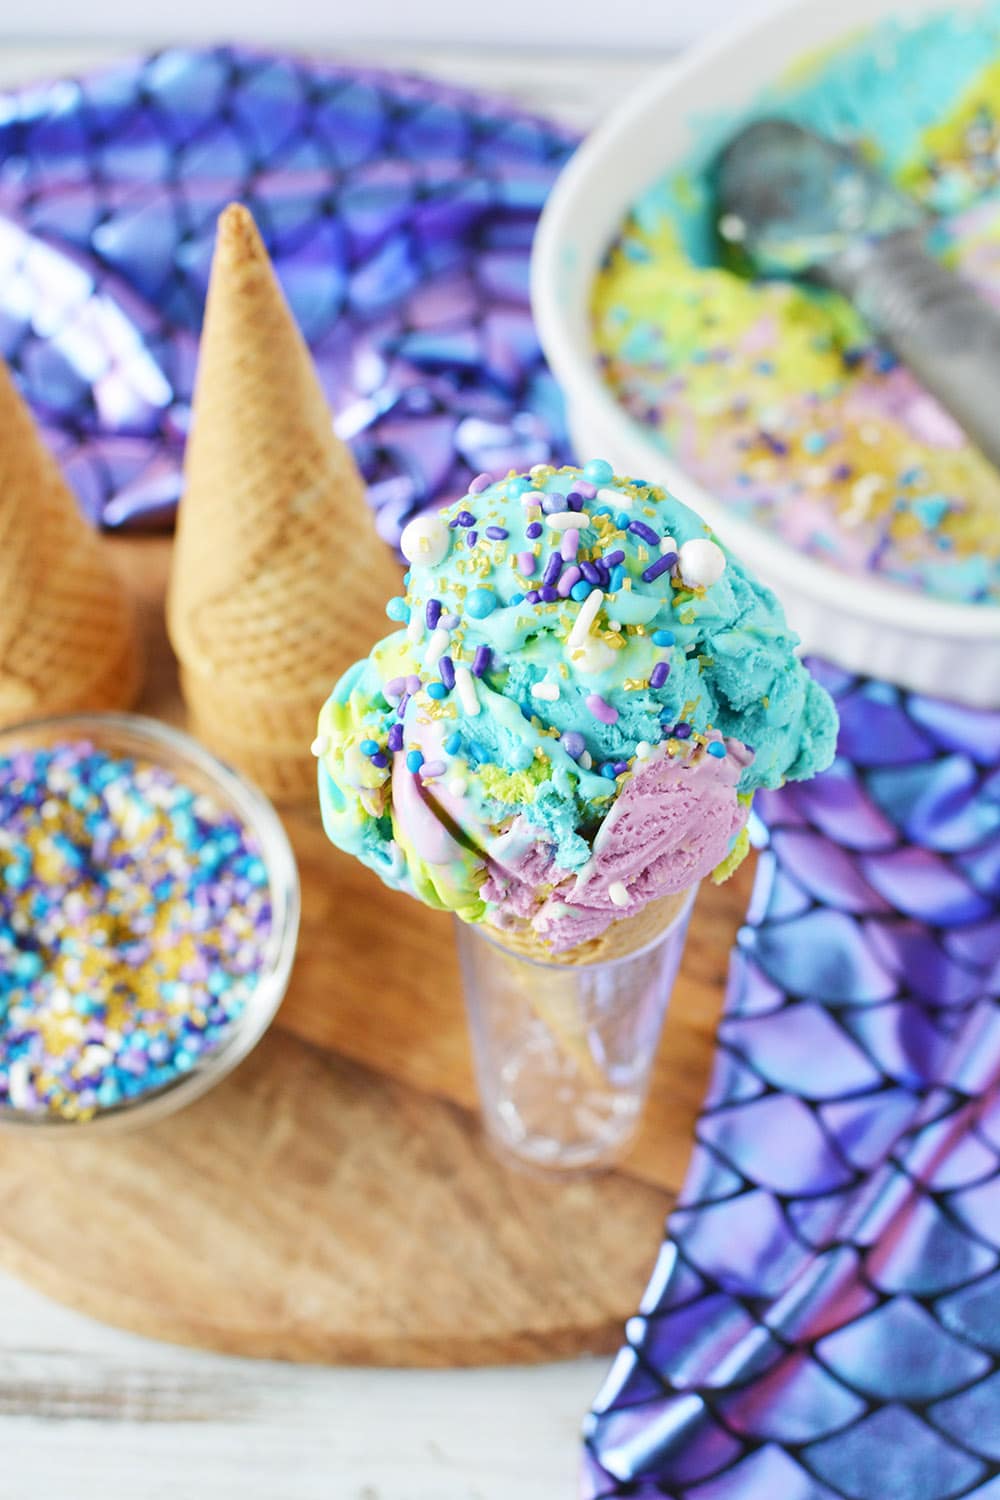 Sprinkles on ice cream in a cone